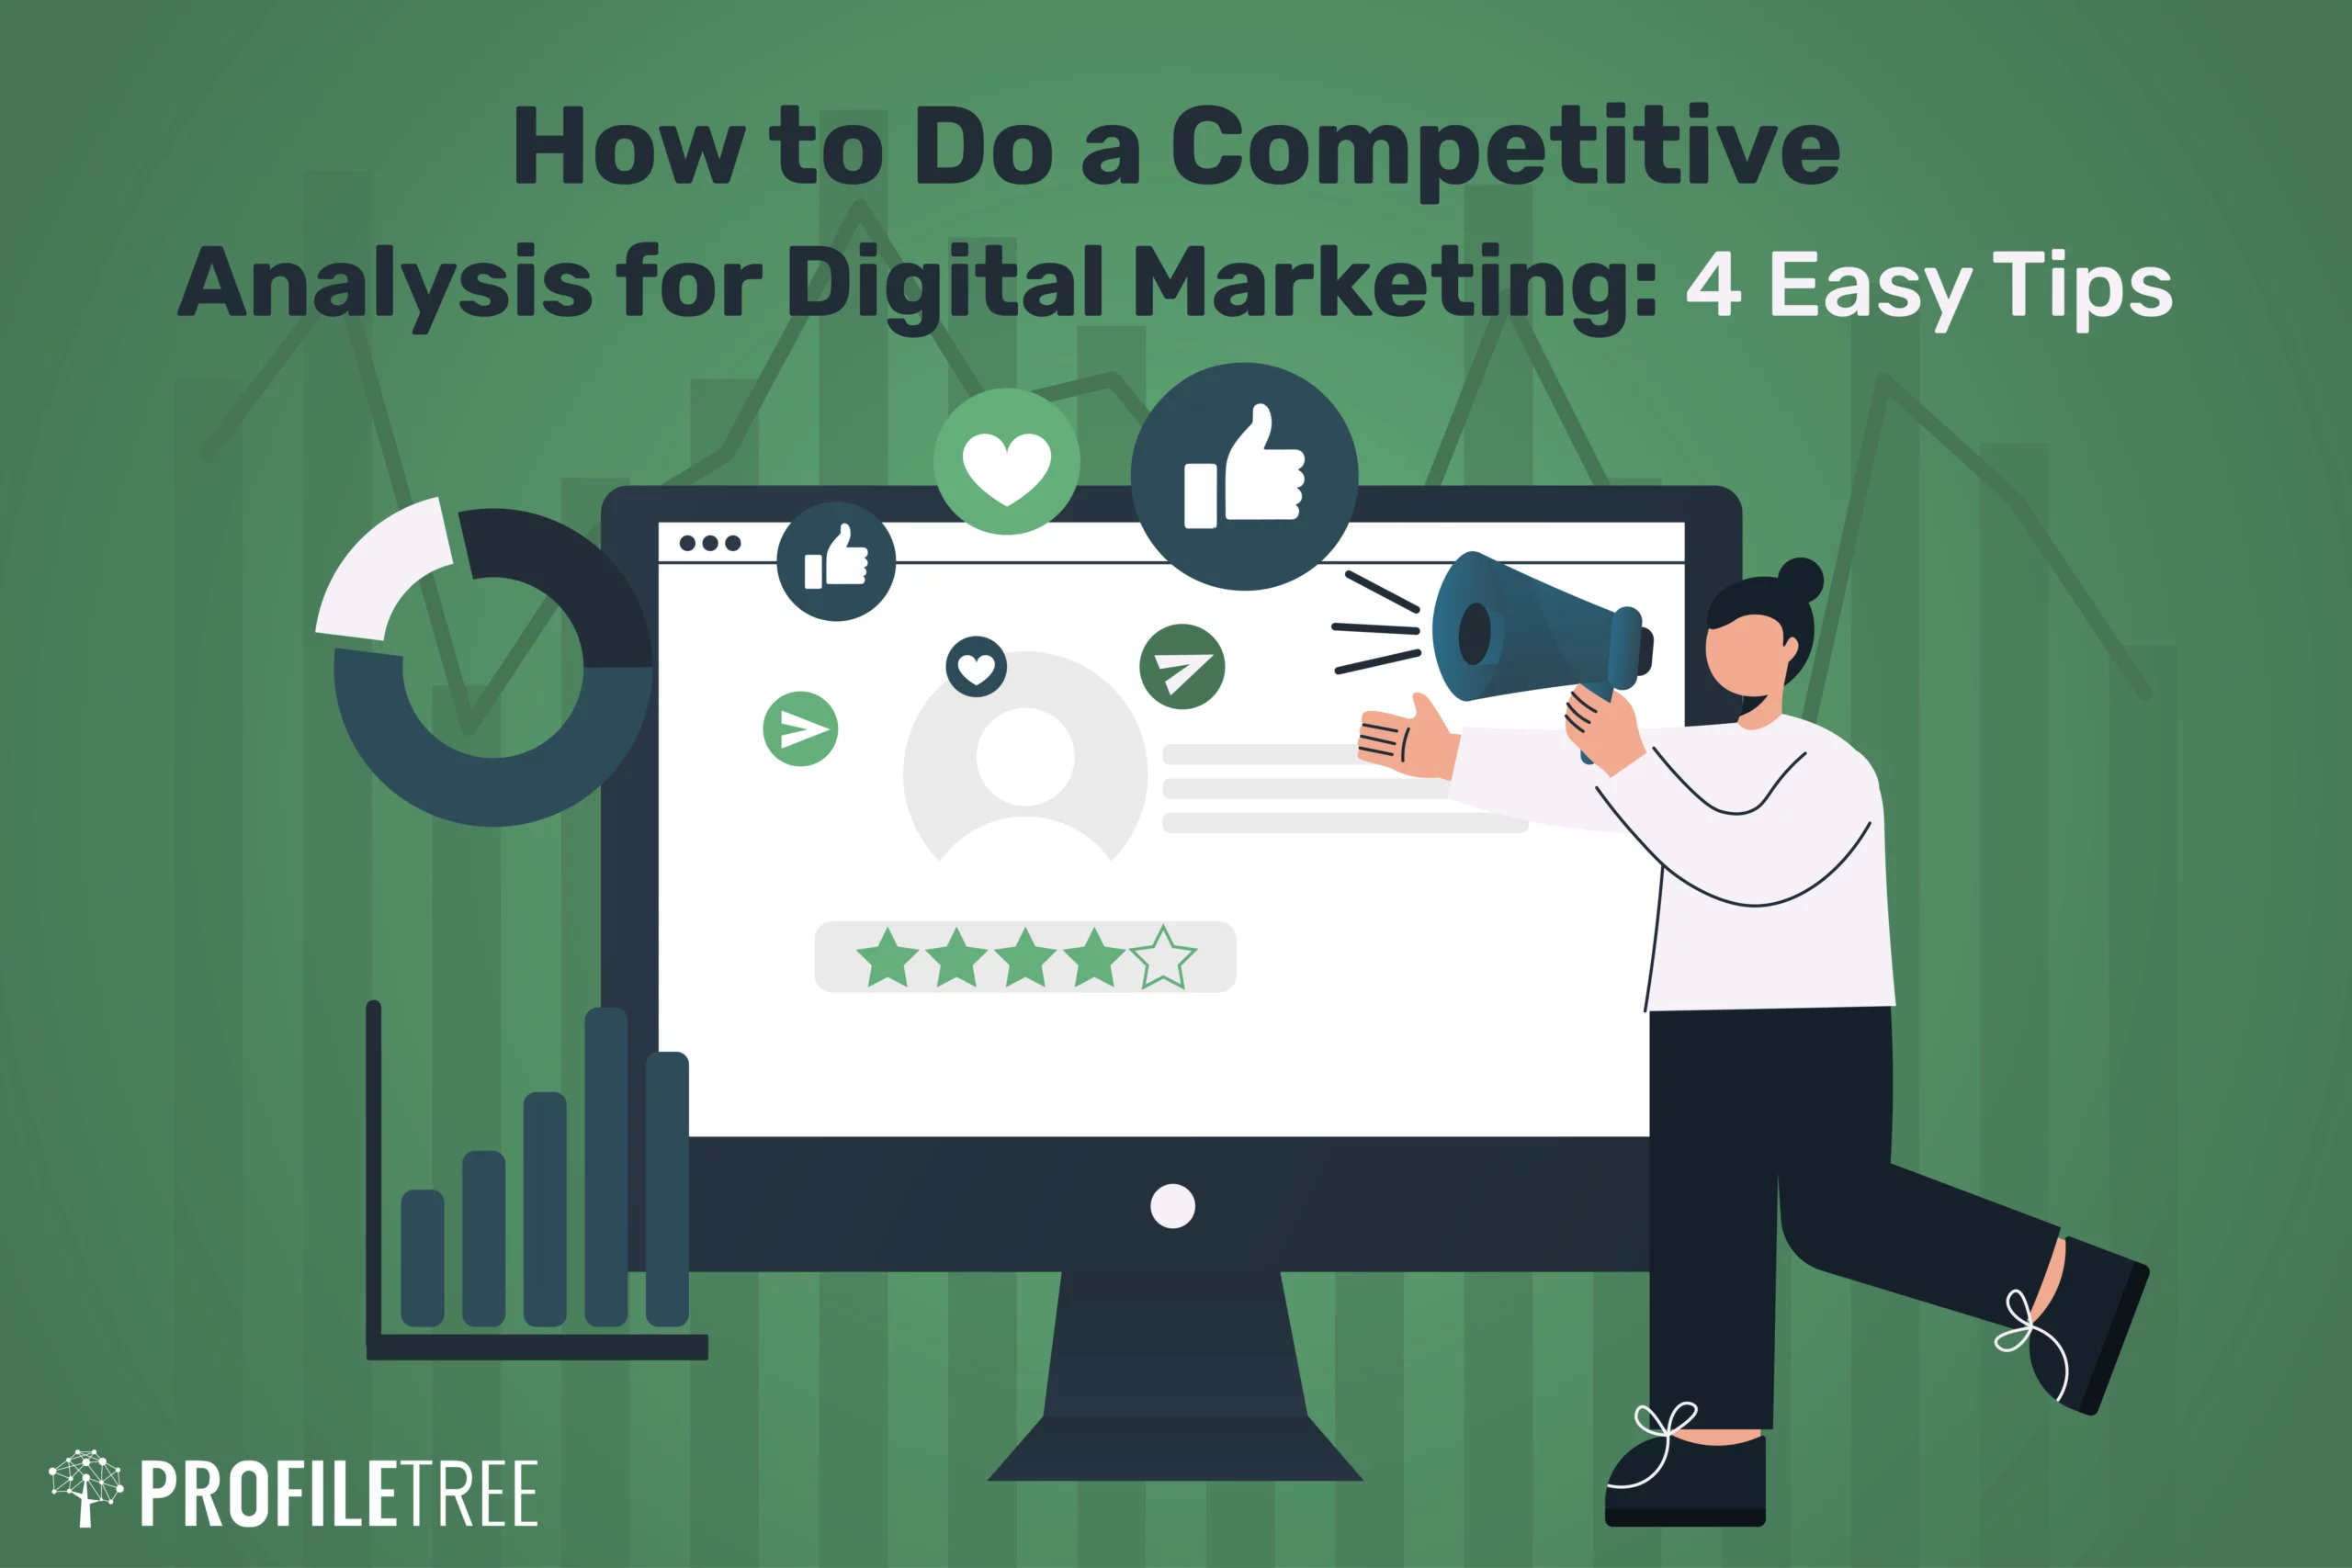 How to Do a Competitive Analysis for Digital Marketing 4 Easy Tips